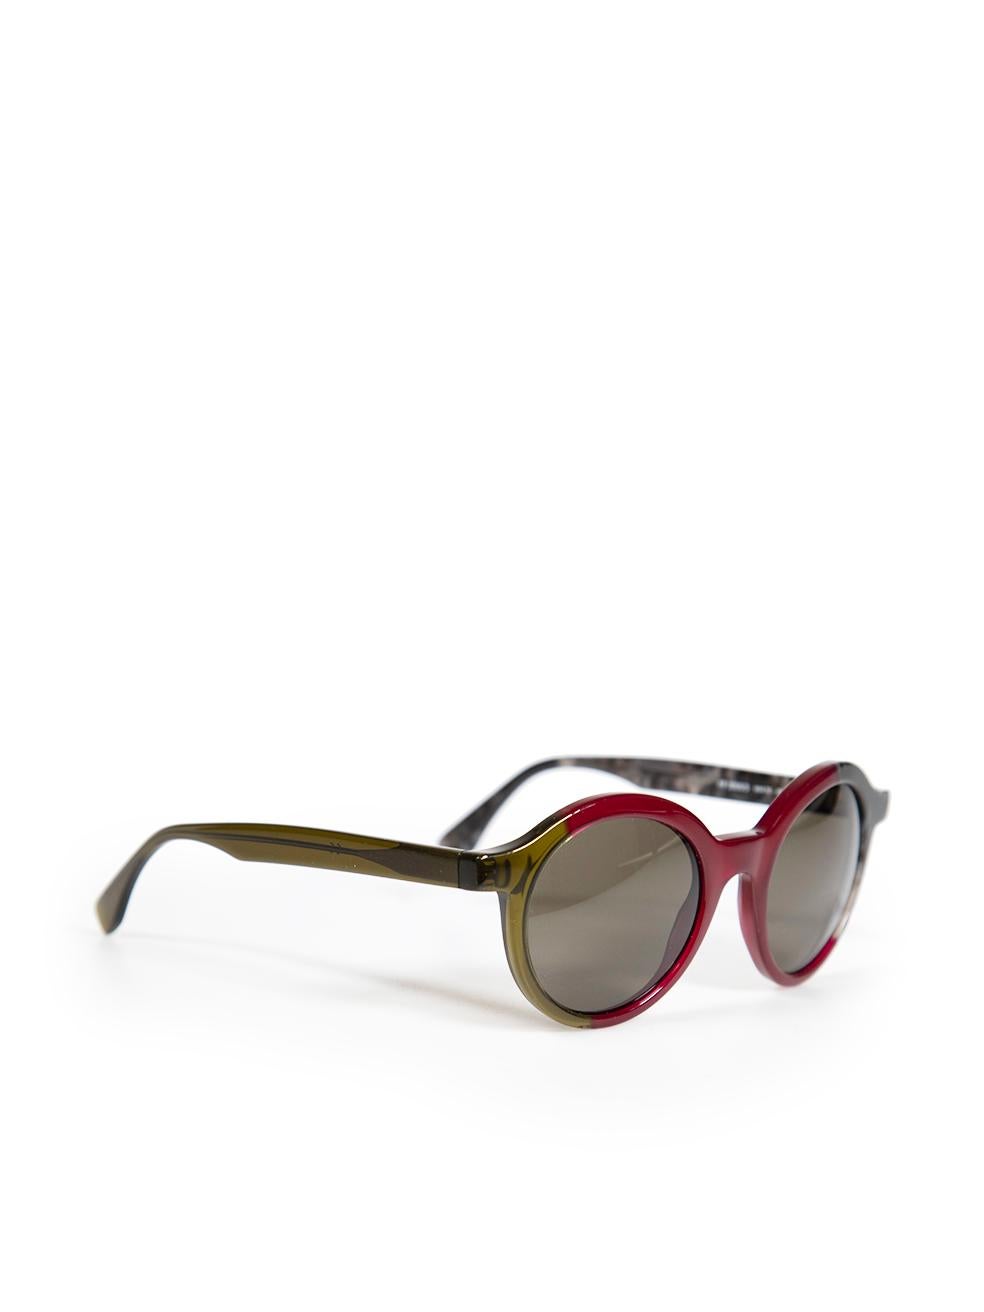 CONDITION is Very good. Minimal wear to sunglasses is evident. Some small scratches to the right side arm end on this used Fendi designer resale item. These sunglasses come with original box.
 
 Details
 Model: Cline Havana
 Multicolour- green, red,